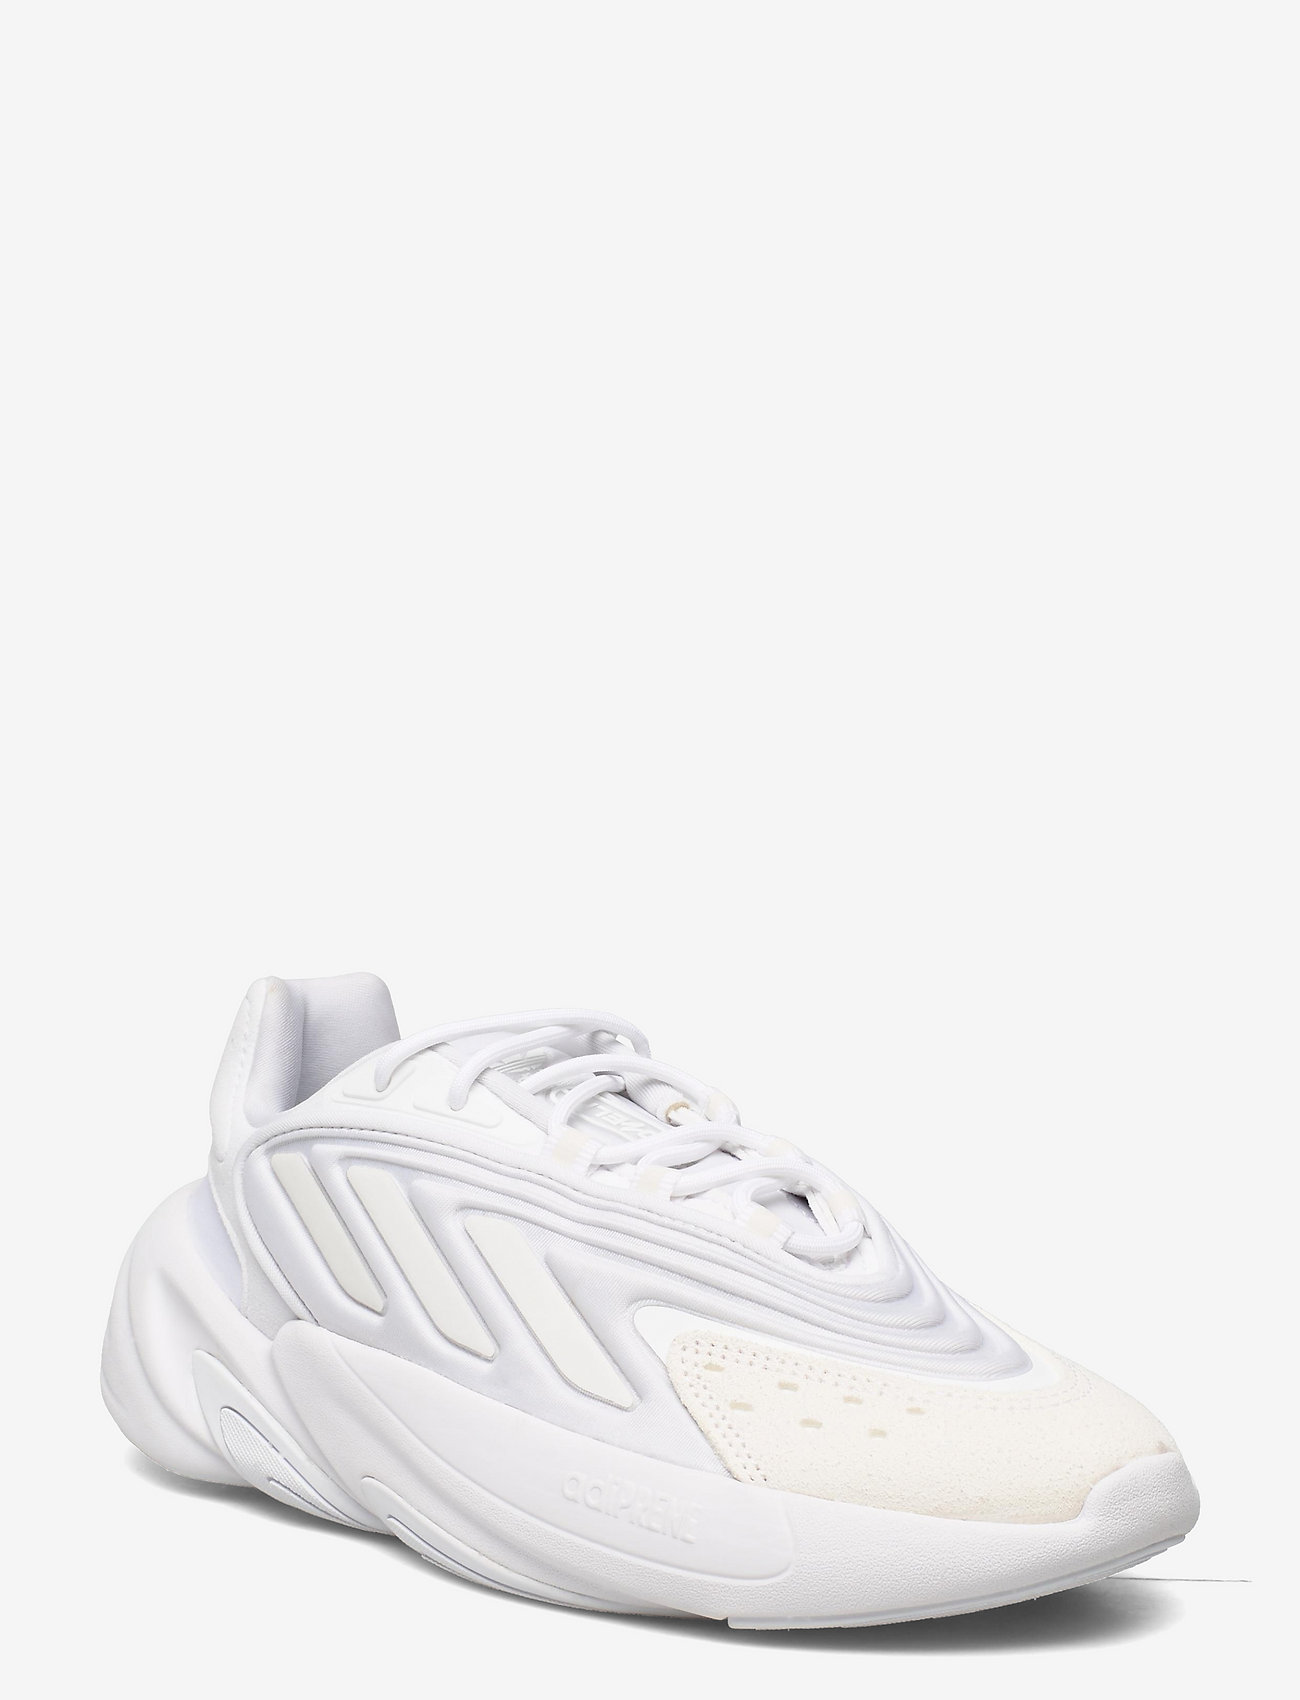 adidas Originals - Ozelia Shoes - chunky sneaker - ftwwht/ftwwht/crywht - 0